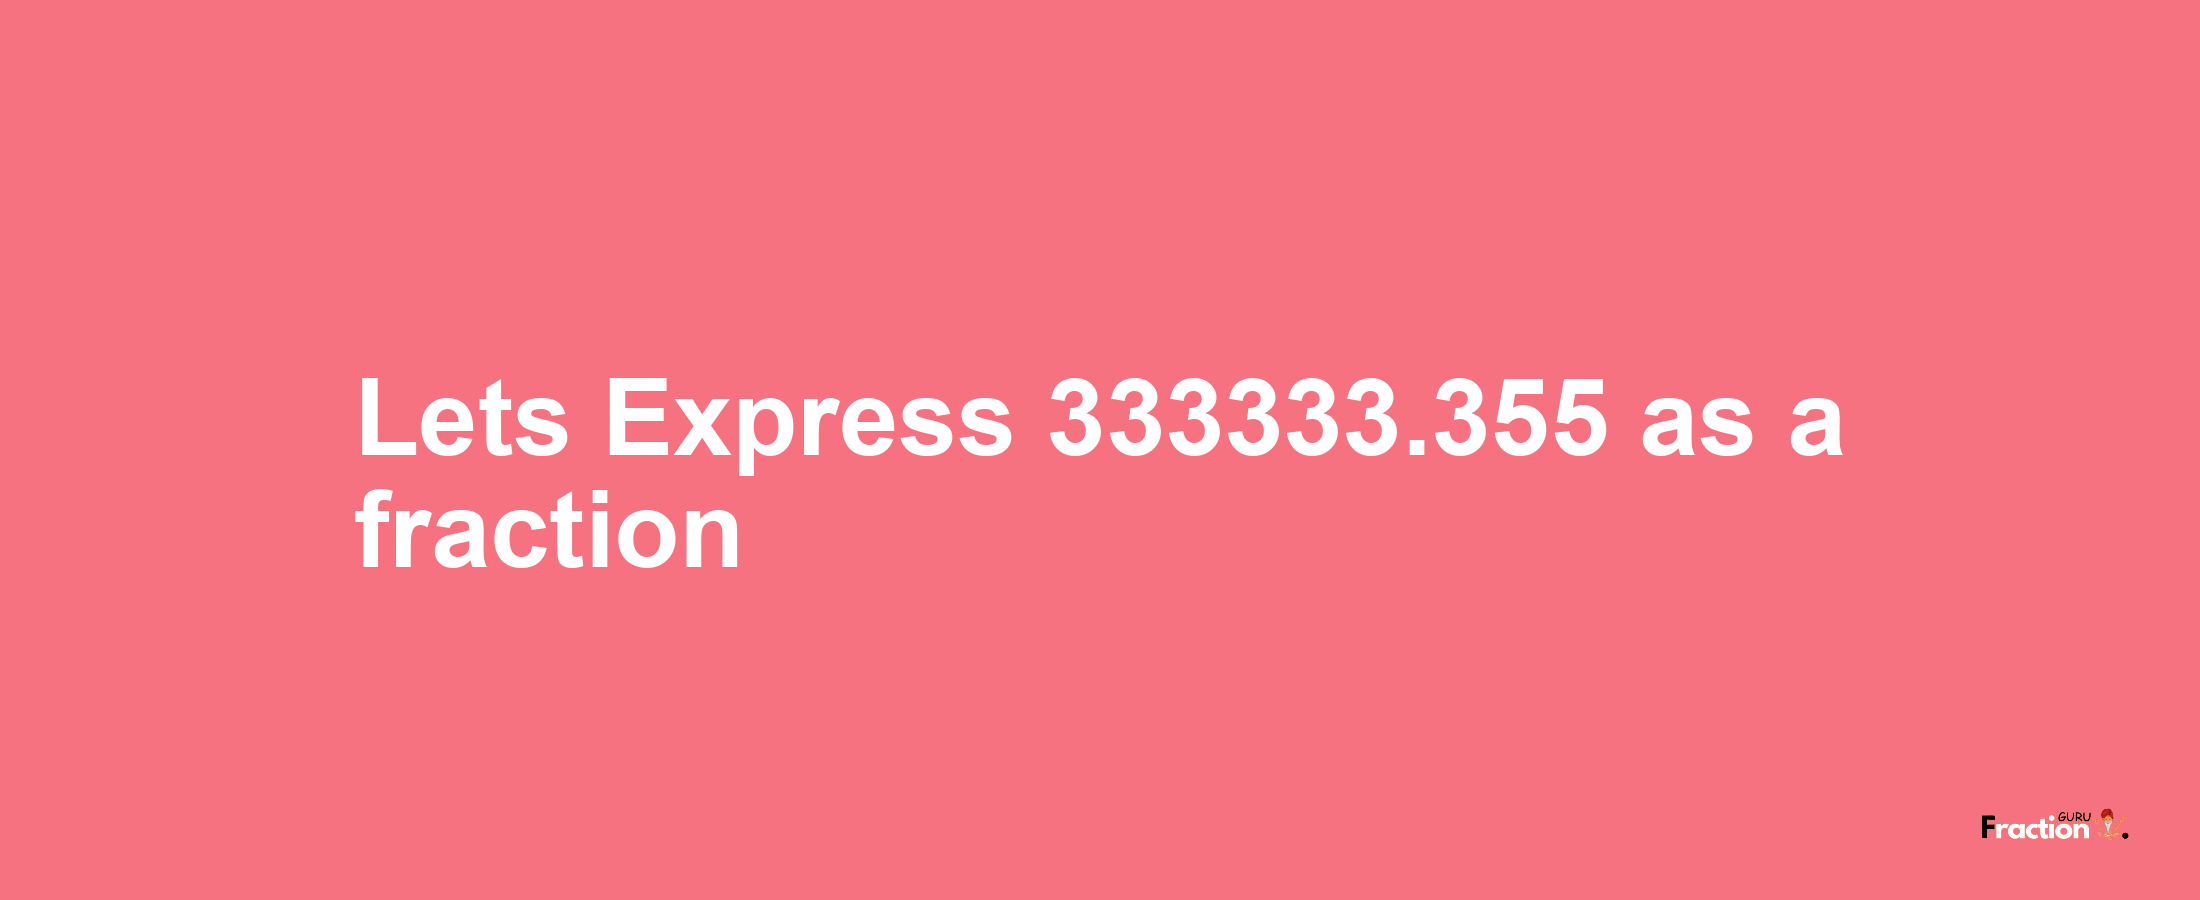 Lets Express 333333.355 as afraction